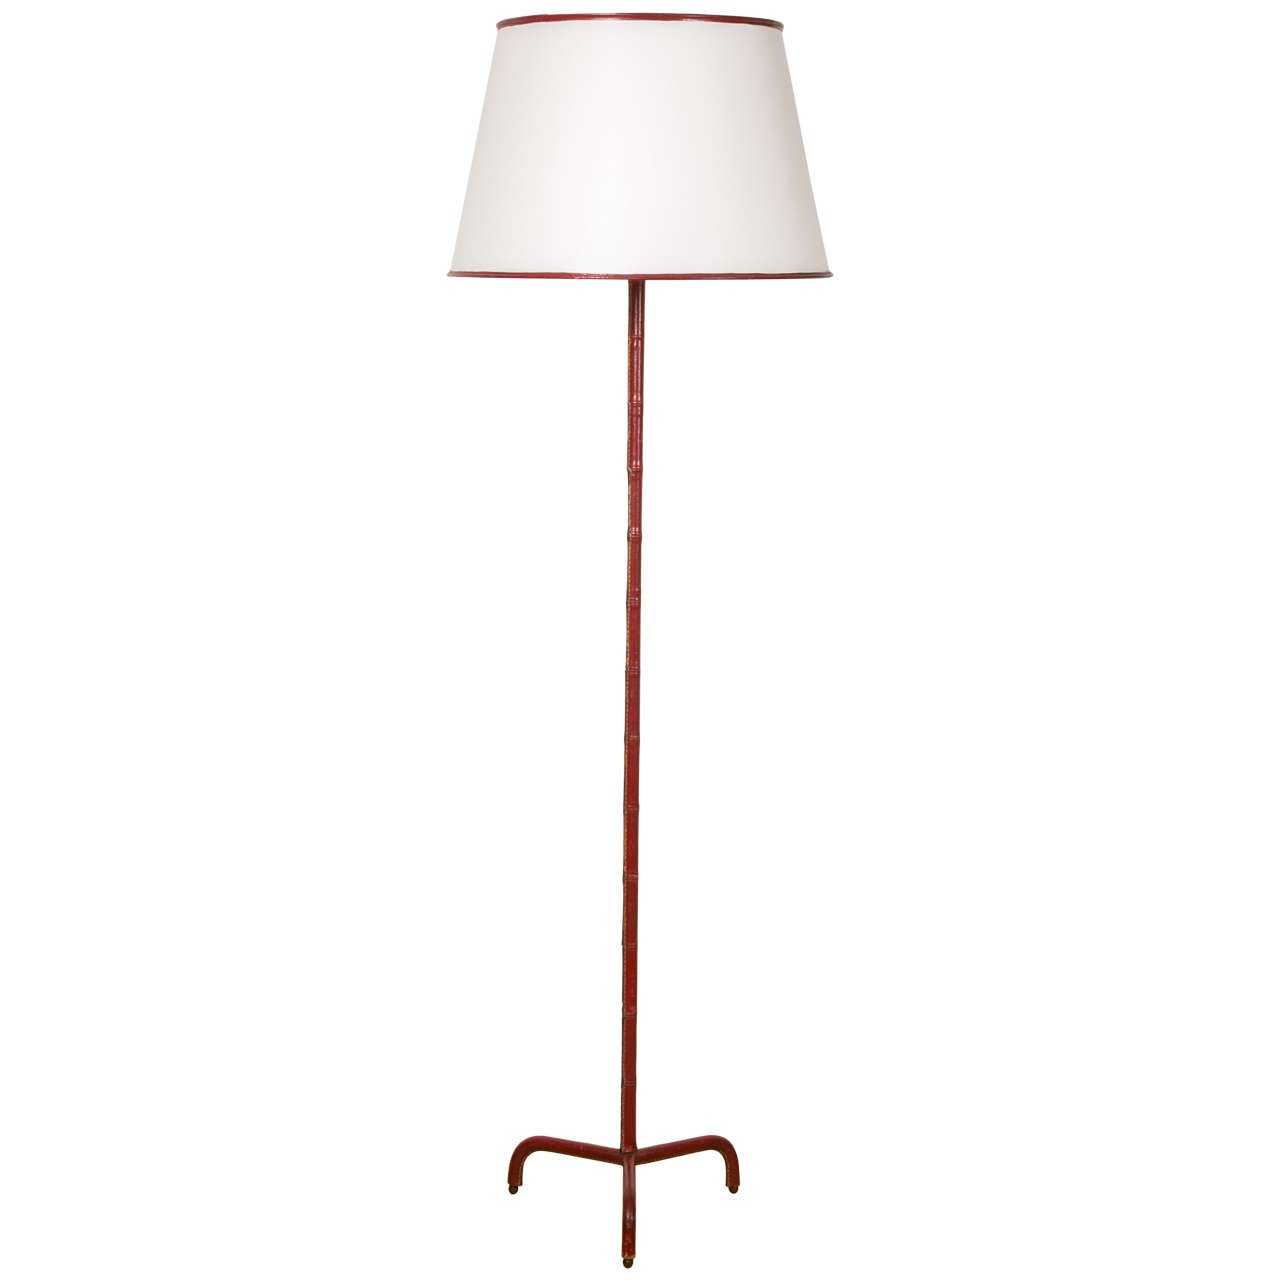 1950s Jacques Adnet Floor Lamp Covered with Bordeaux Red Leather